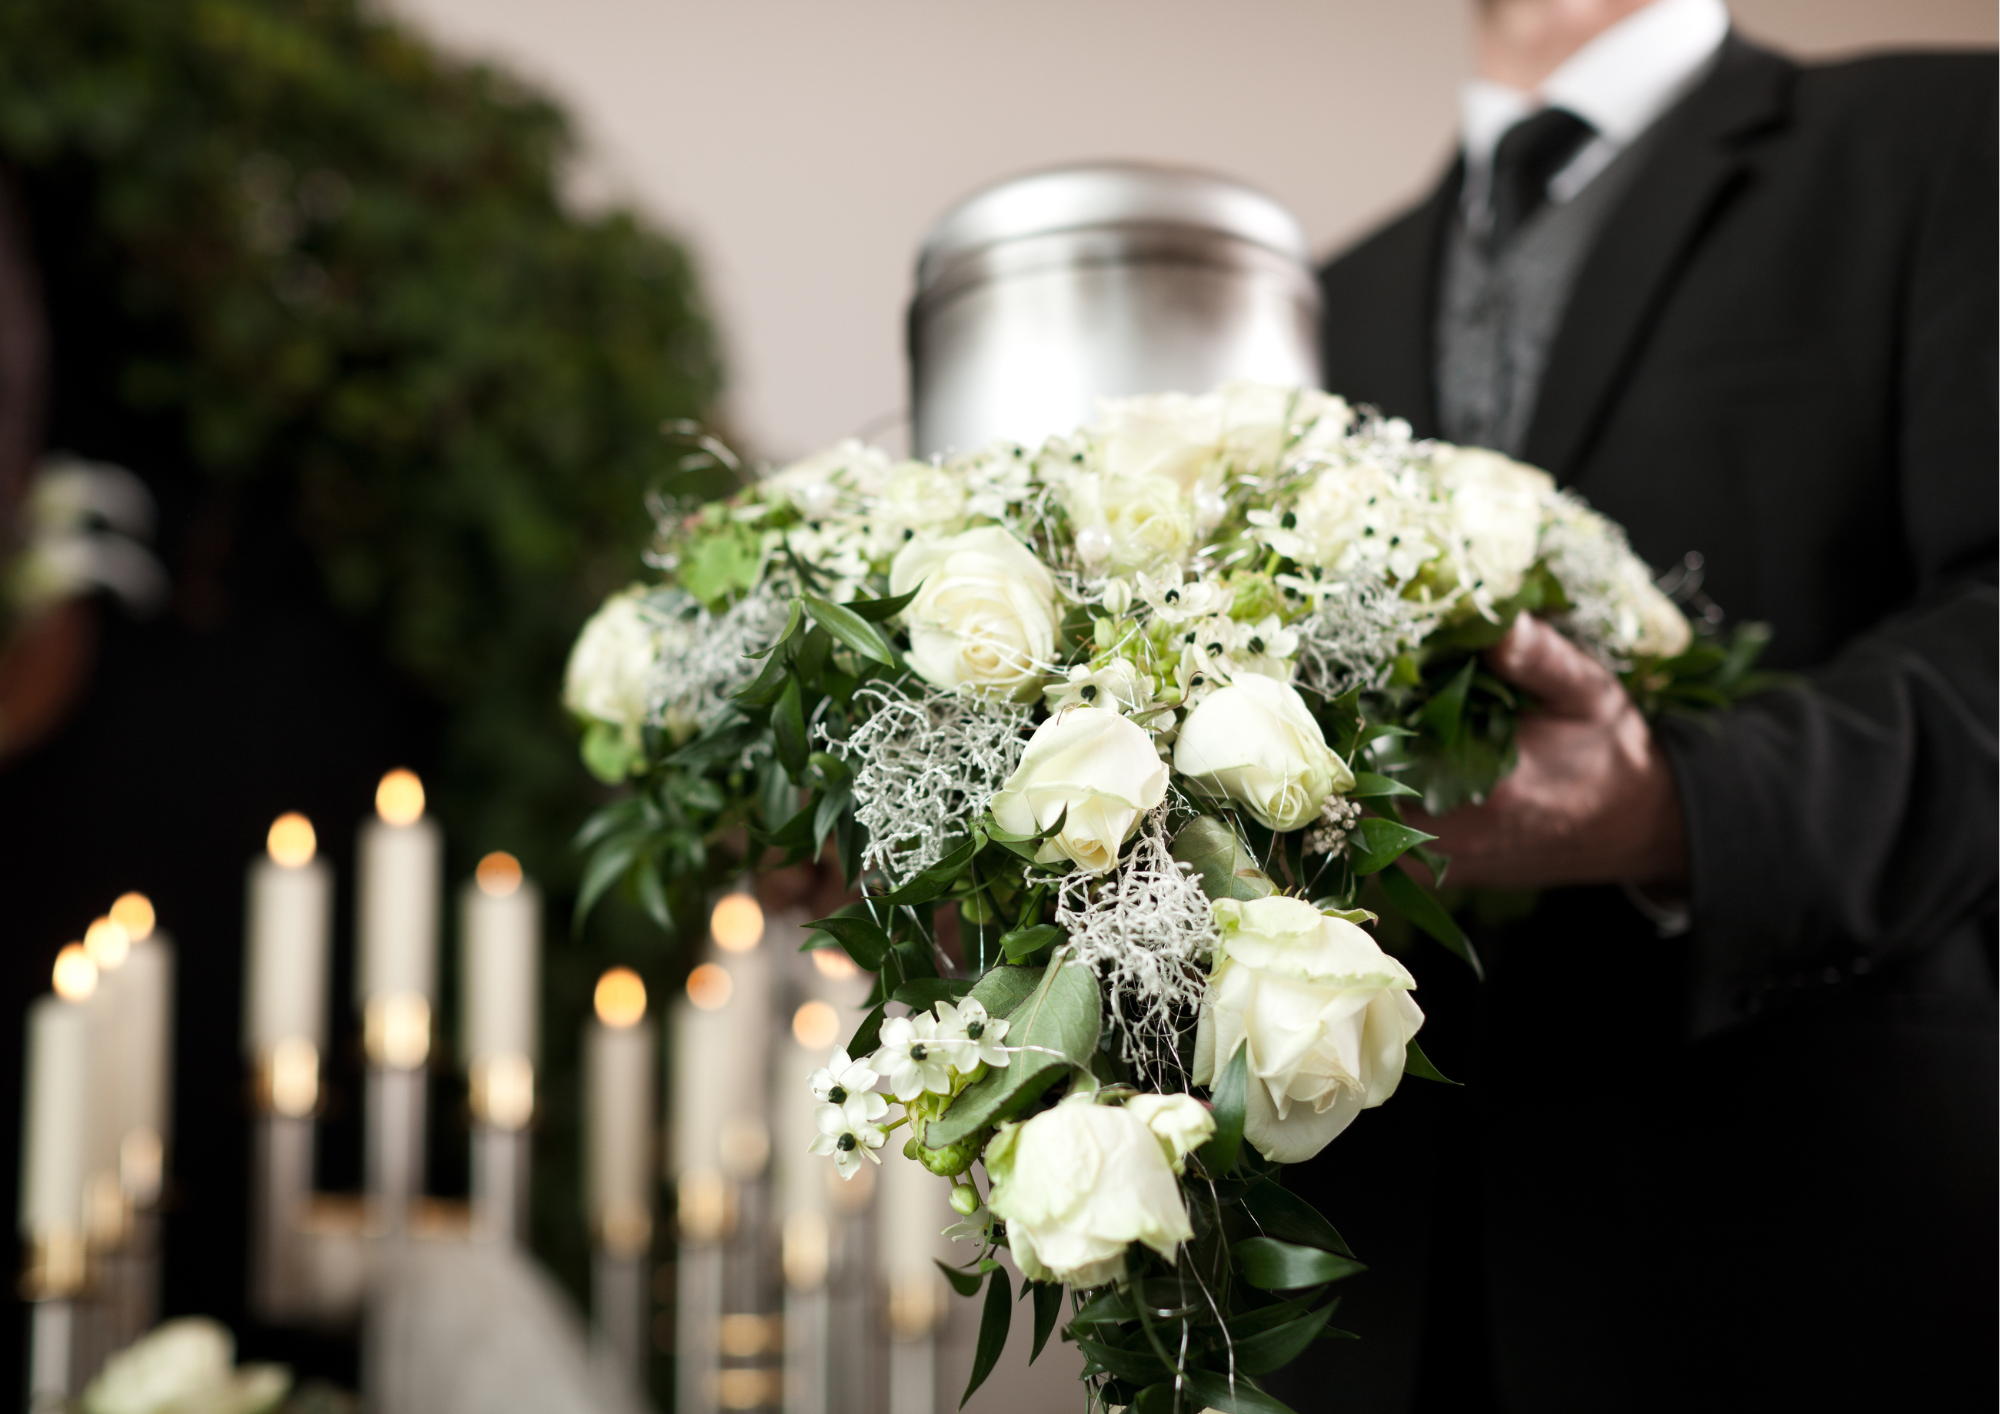 5 Ways Your Funeral Director Can Help When Someone Dies